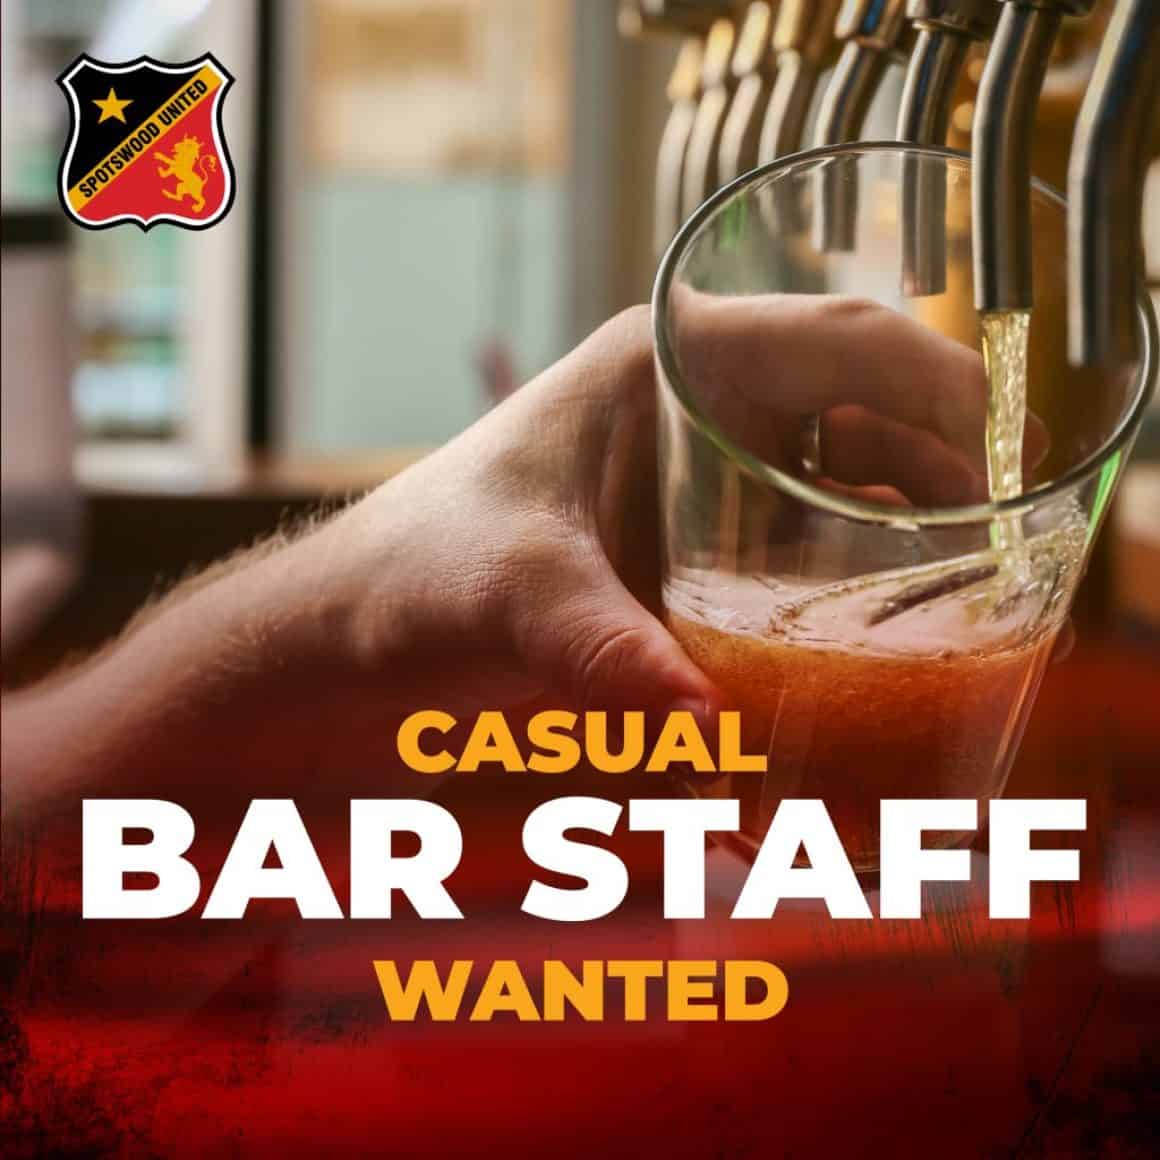 Casual bar staff Wanted